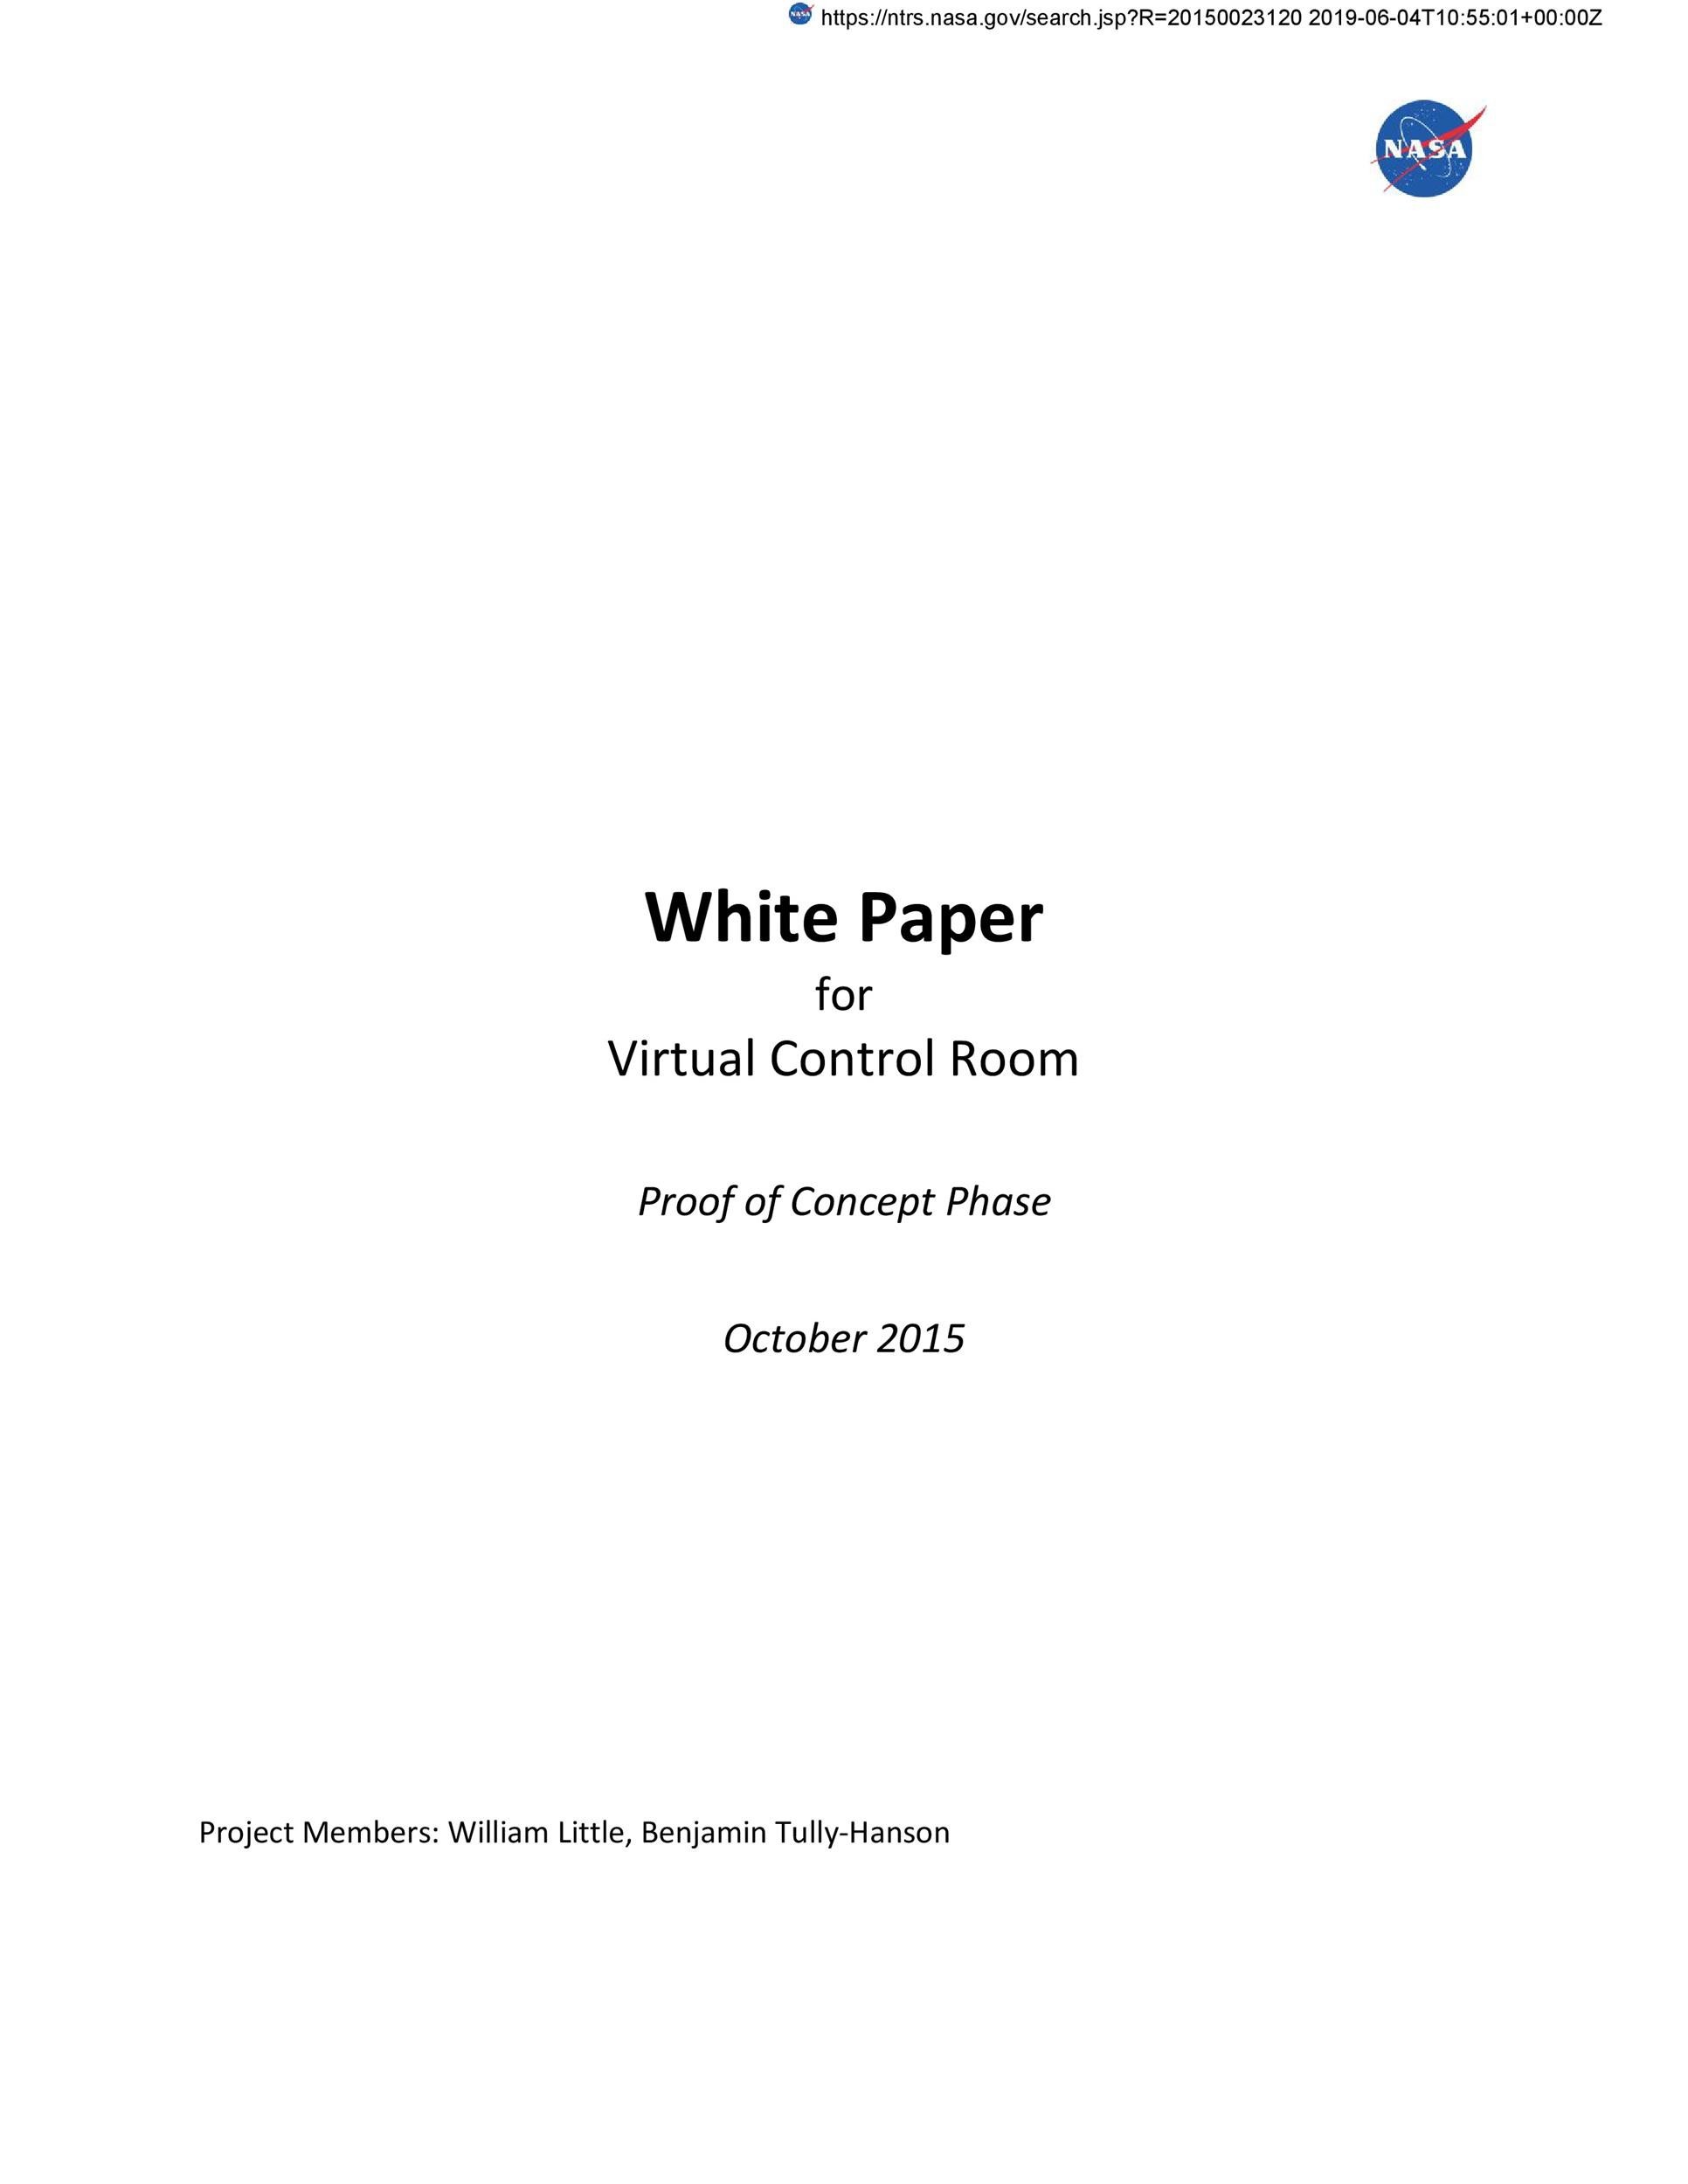 50 Best White Paper Templates (MS Word) ᐅ TemplateLab